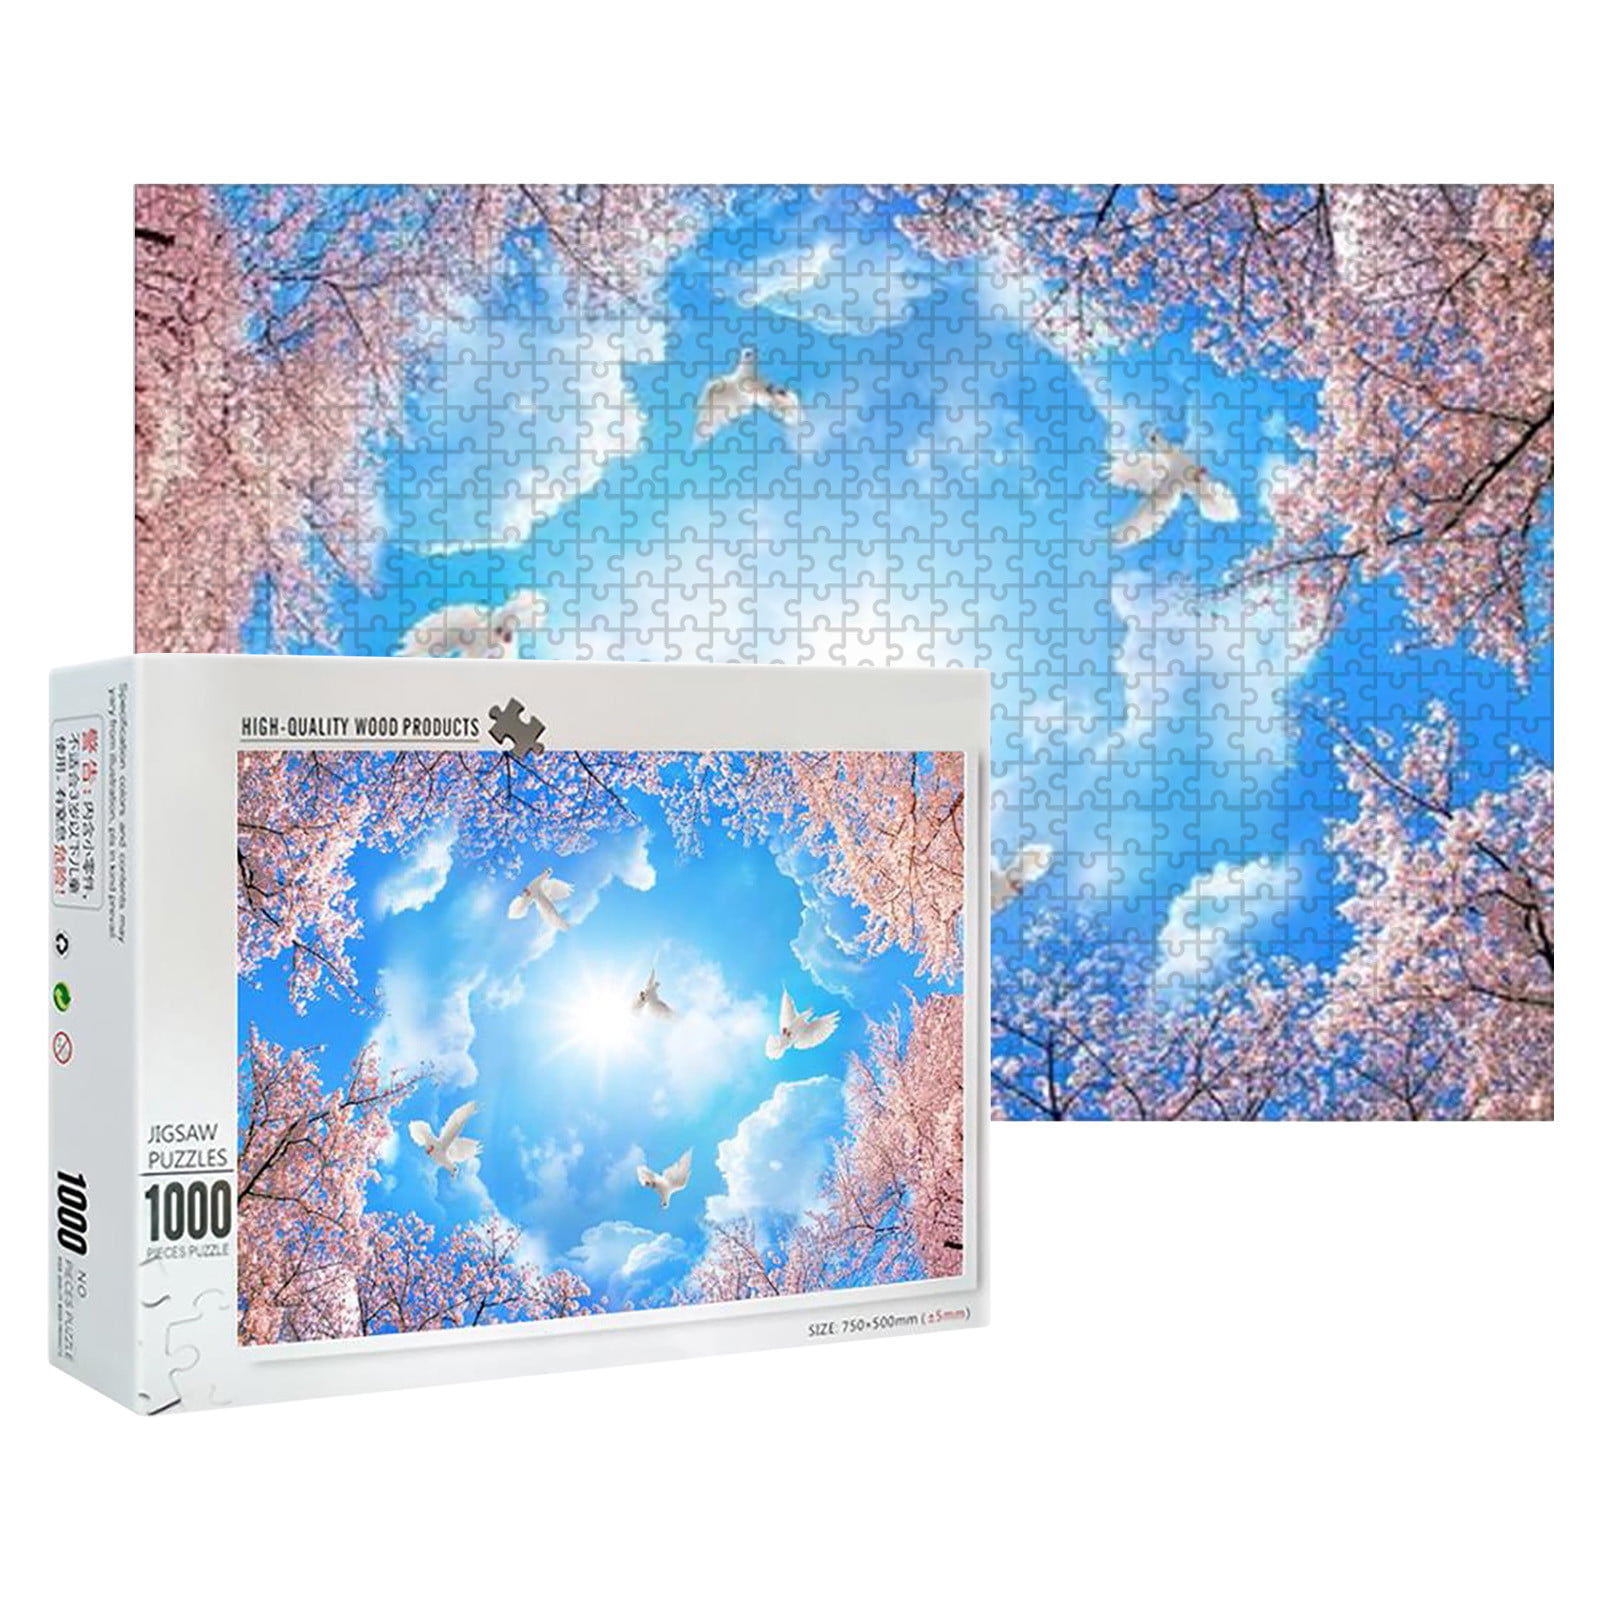 4000 Pieces of Adult Jigsaw Puzzle Bird Game Indoor Educational Activities Entertaining Puzzle Games for Adults and Children